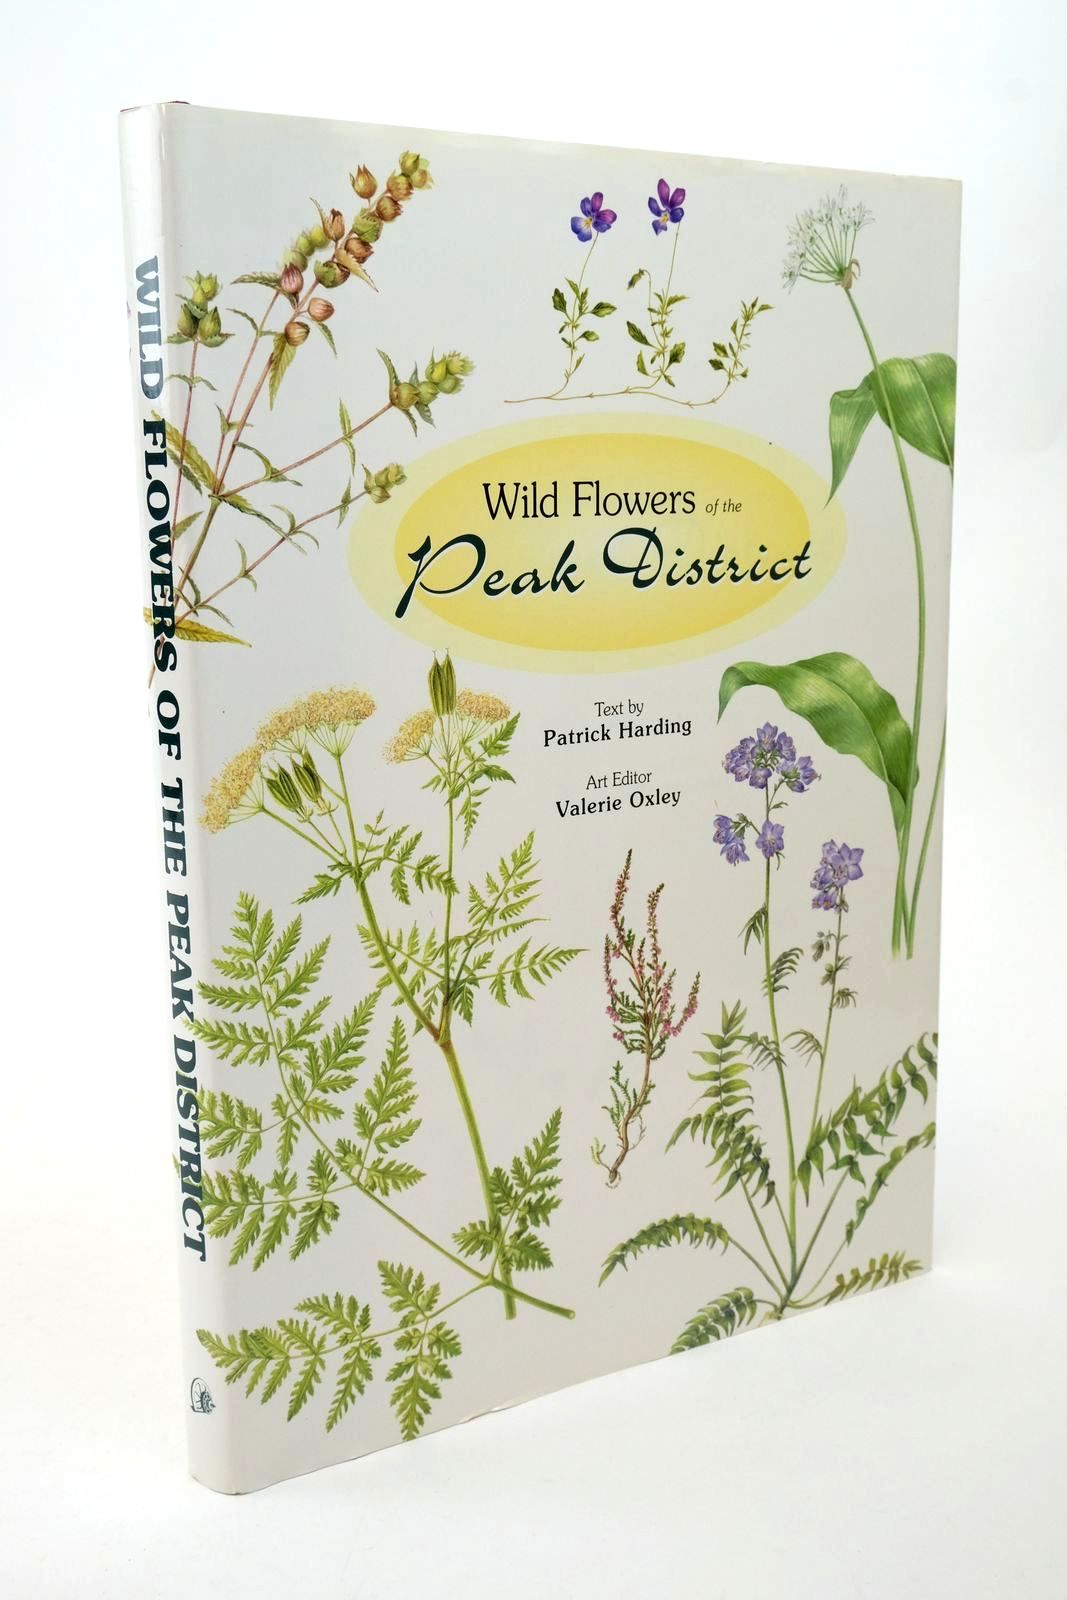 Photo of WILD FLOWERS OF THE PEAK DISTRICT written by Harding, Patrick illustrated by Oxley, Valerie published by The Hallamshire Press (STOCK CODE: 1322622)  for sale by Stella & Rose's Books